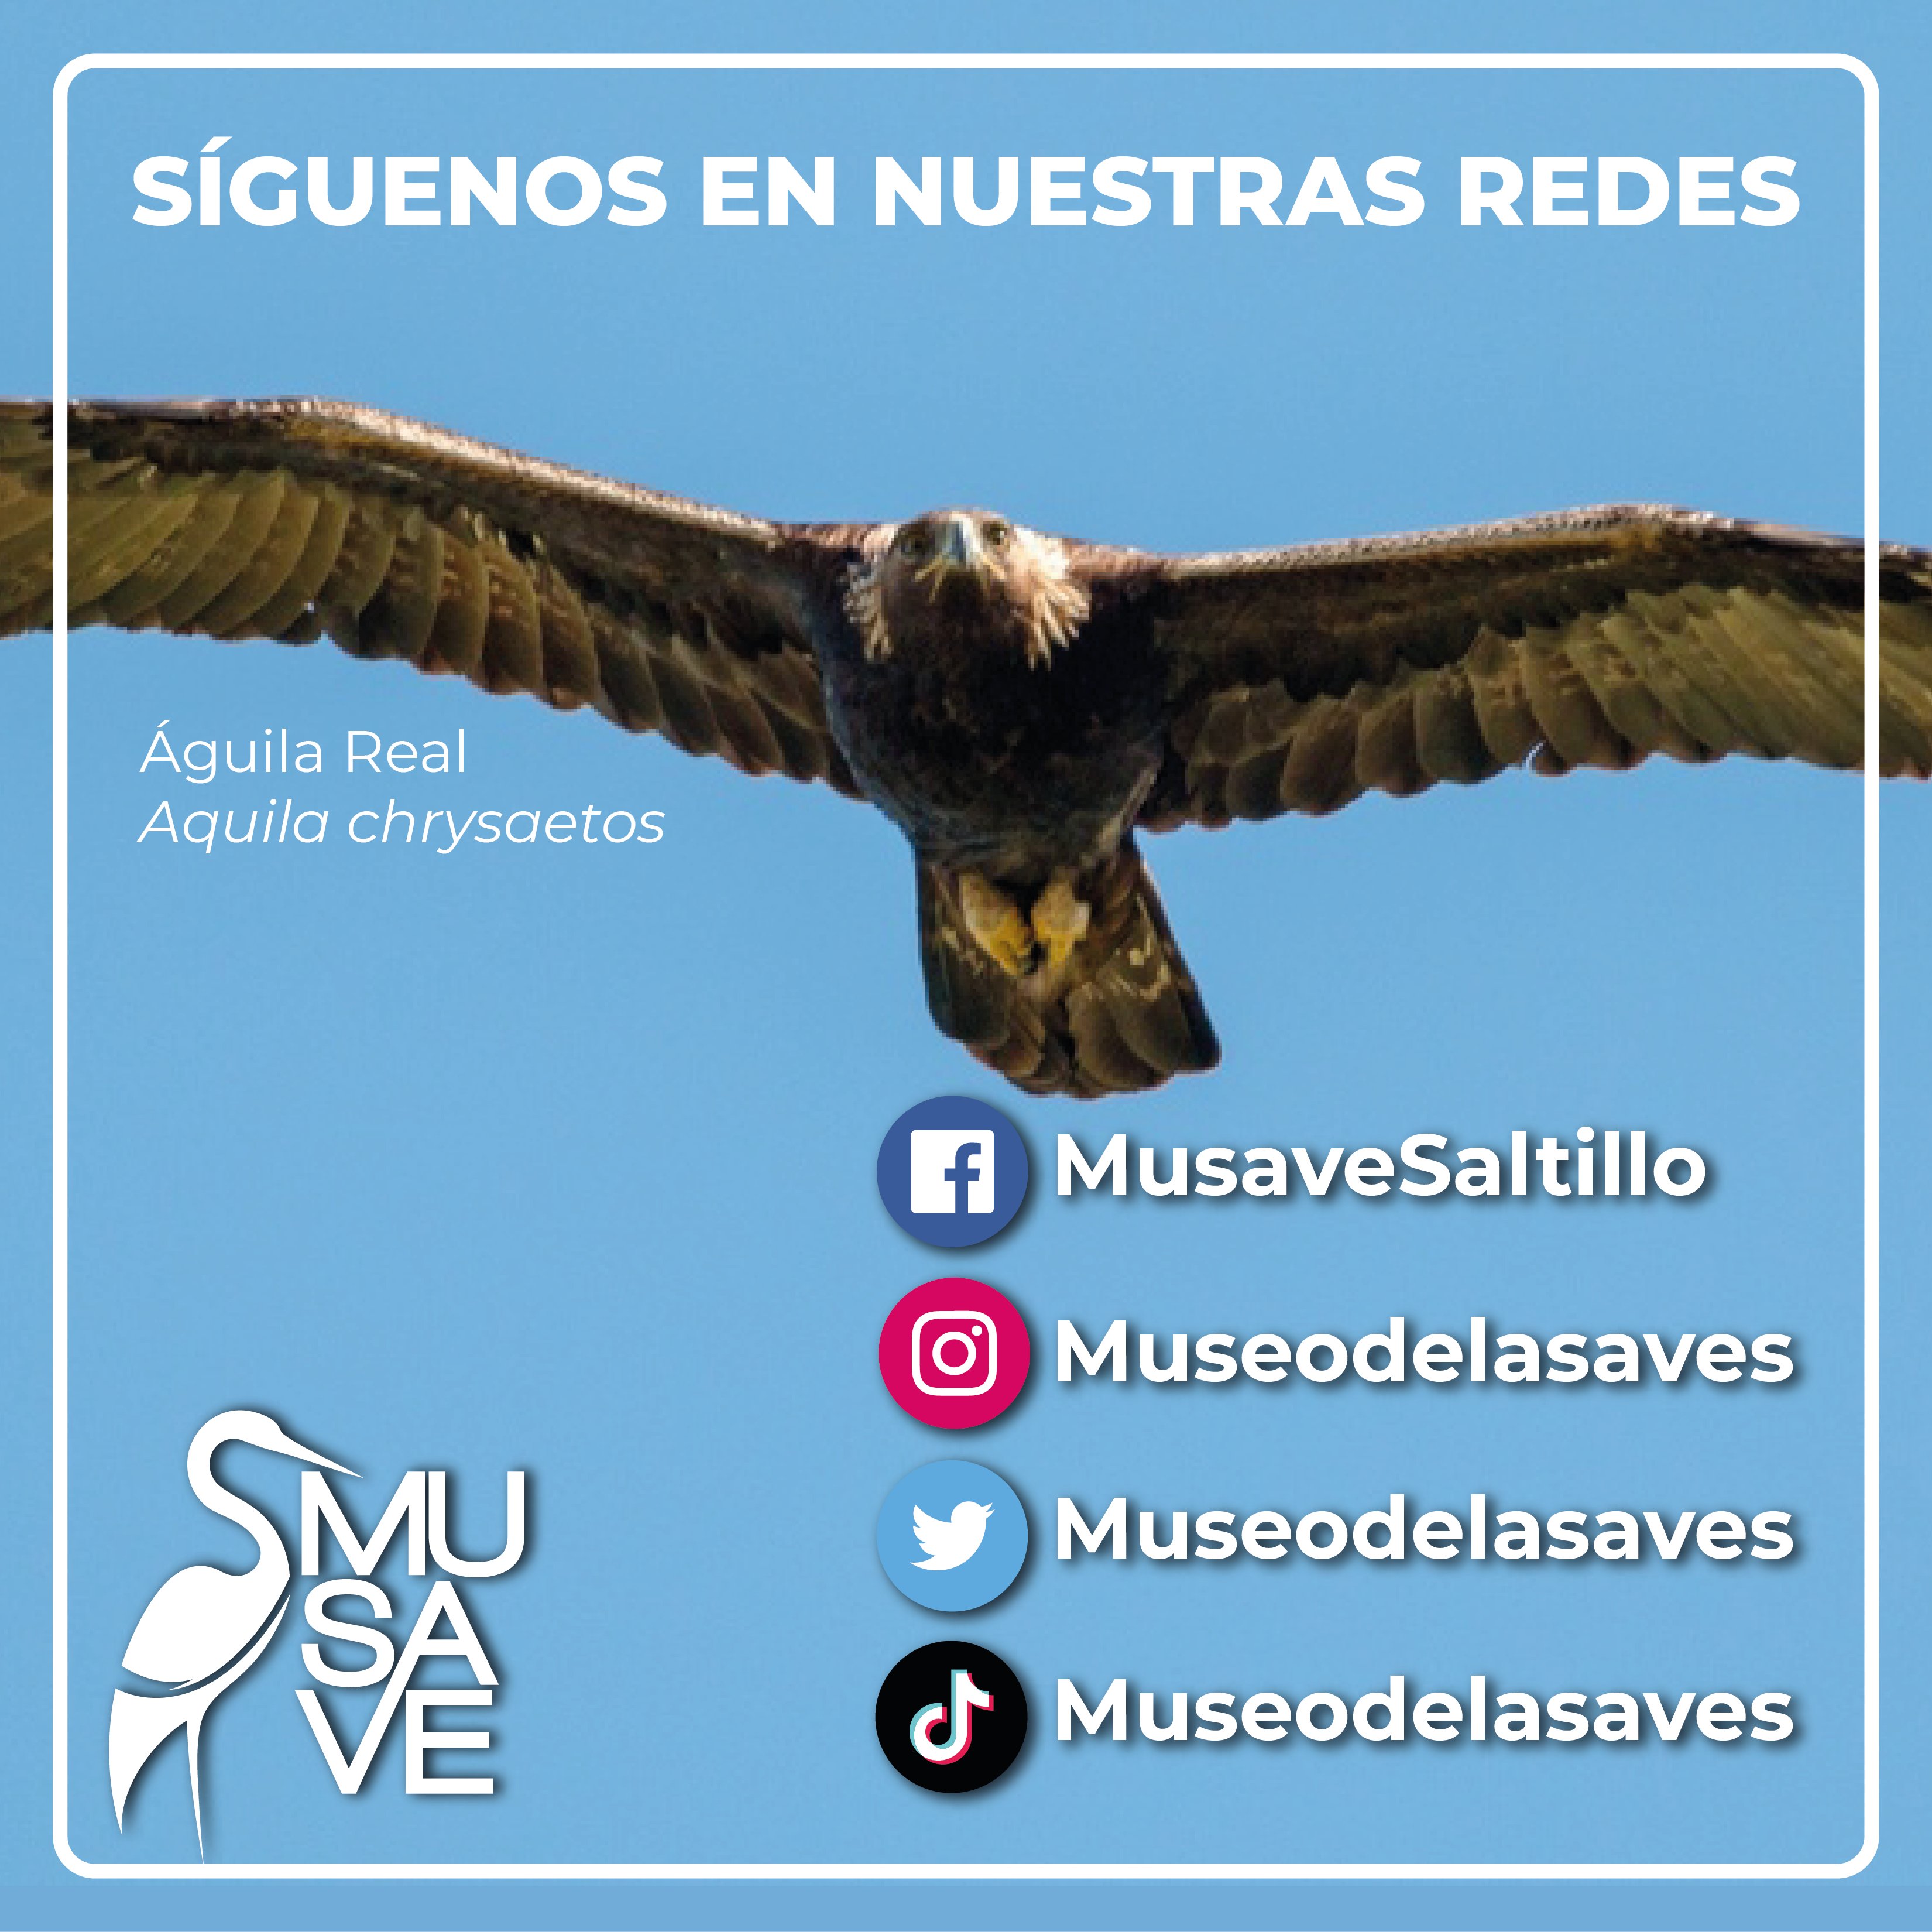 MUSAVE on Twitter: 